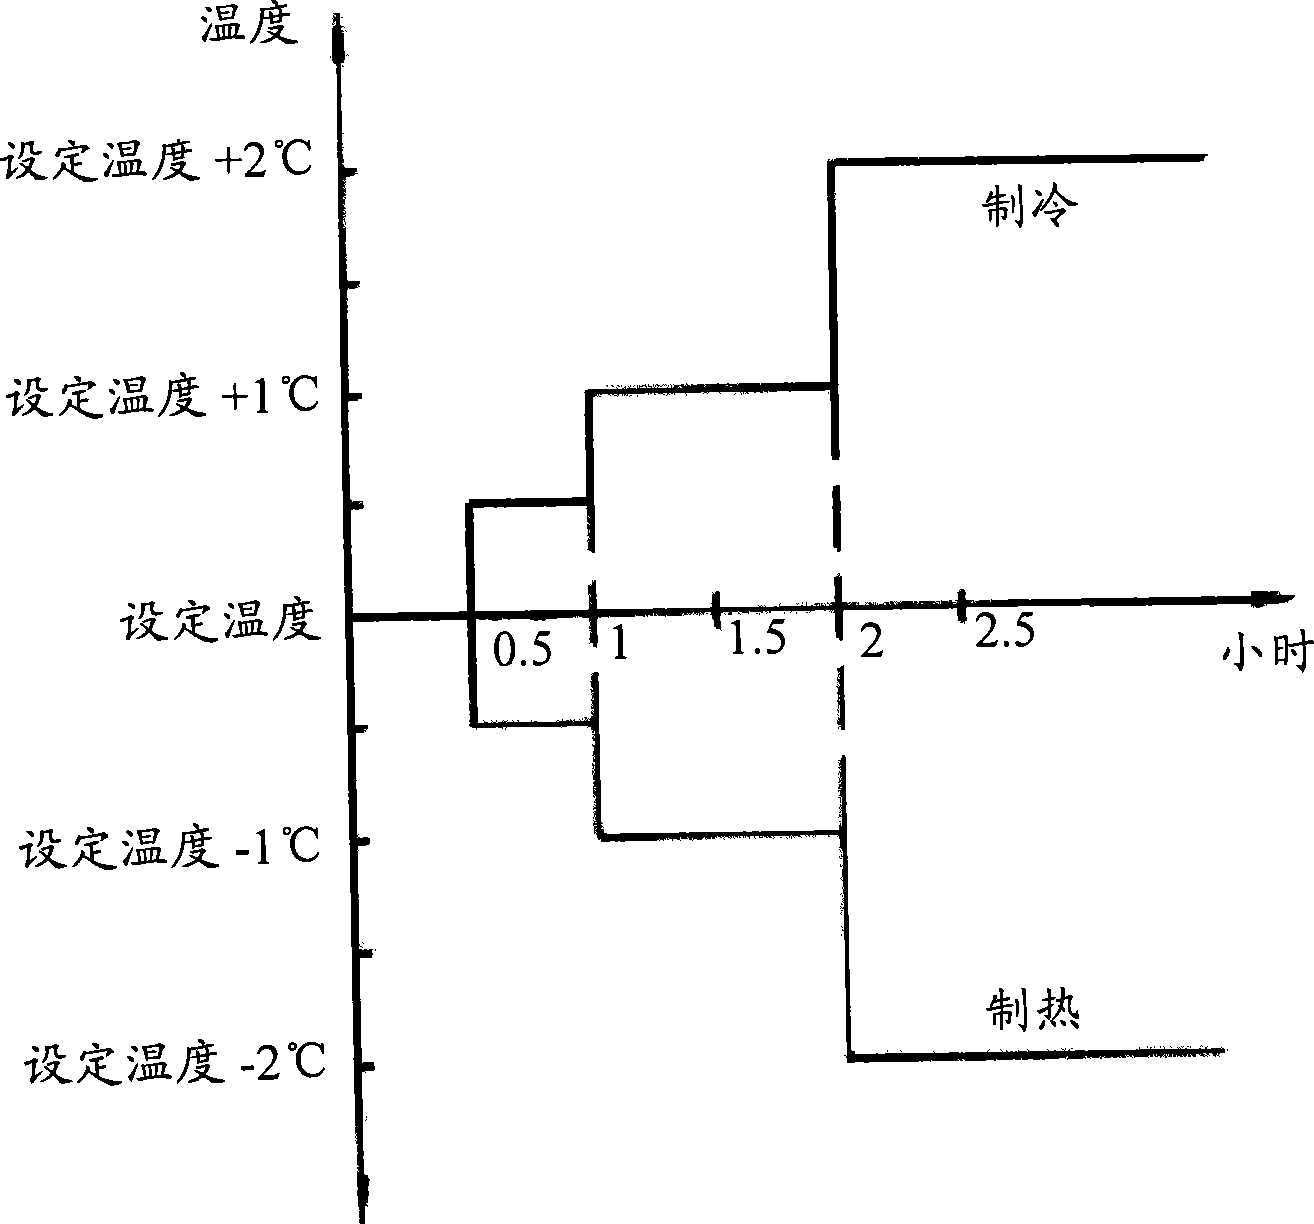 Method for controlling air conditioner to operate as custom curve